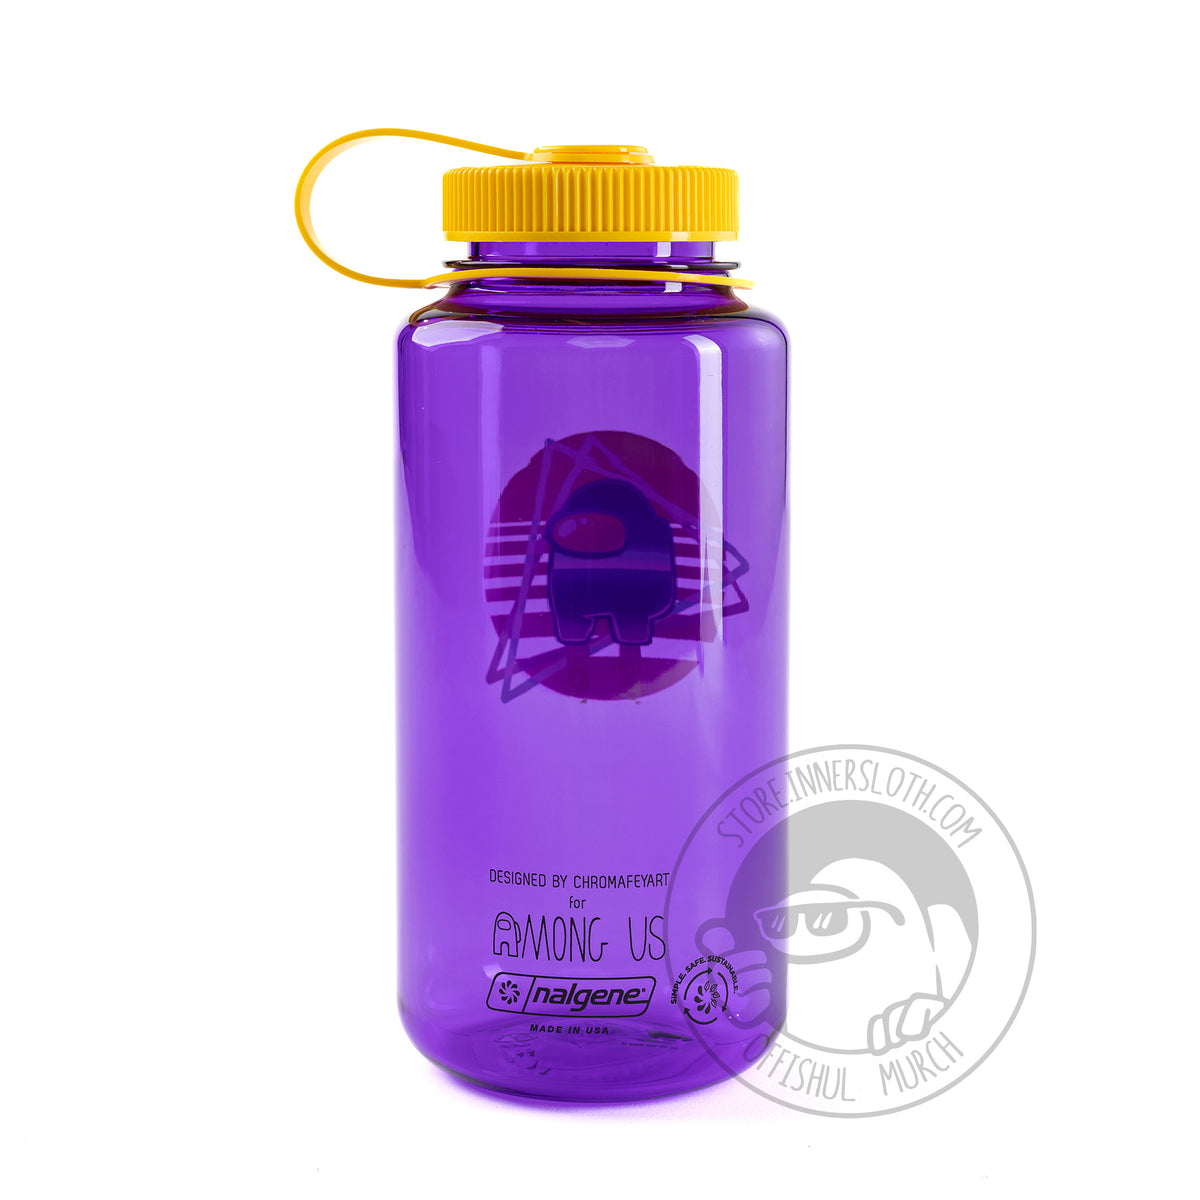 A photo of the back of the  Vaporwave themed Crewmate on a traslucent purple nalgene waterbottle Bottom text reads “designed by Chromafey Art for Among Us” below the text is a stamped on logo that reads “nalgene” made in the USA. Next to it is a logo of rotating arrows with various stages of leaves in the middle. Around it is text that says “Simple, Safe, and Sustainable”